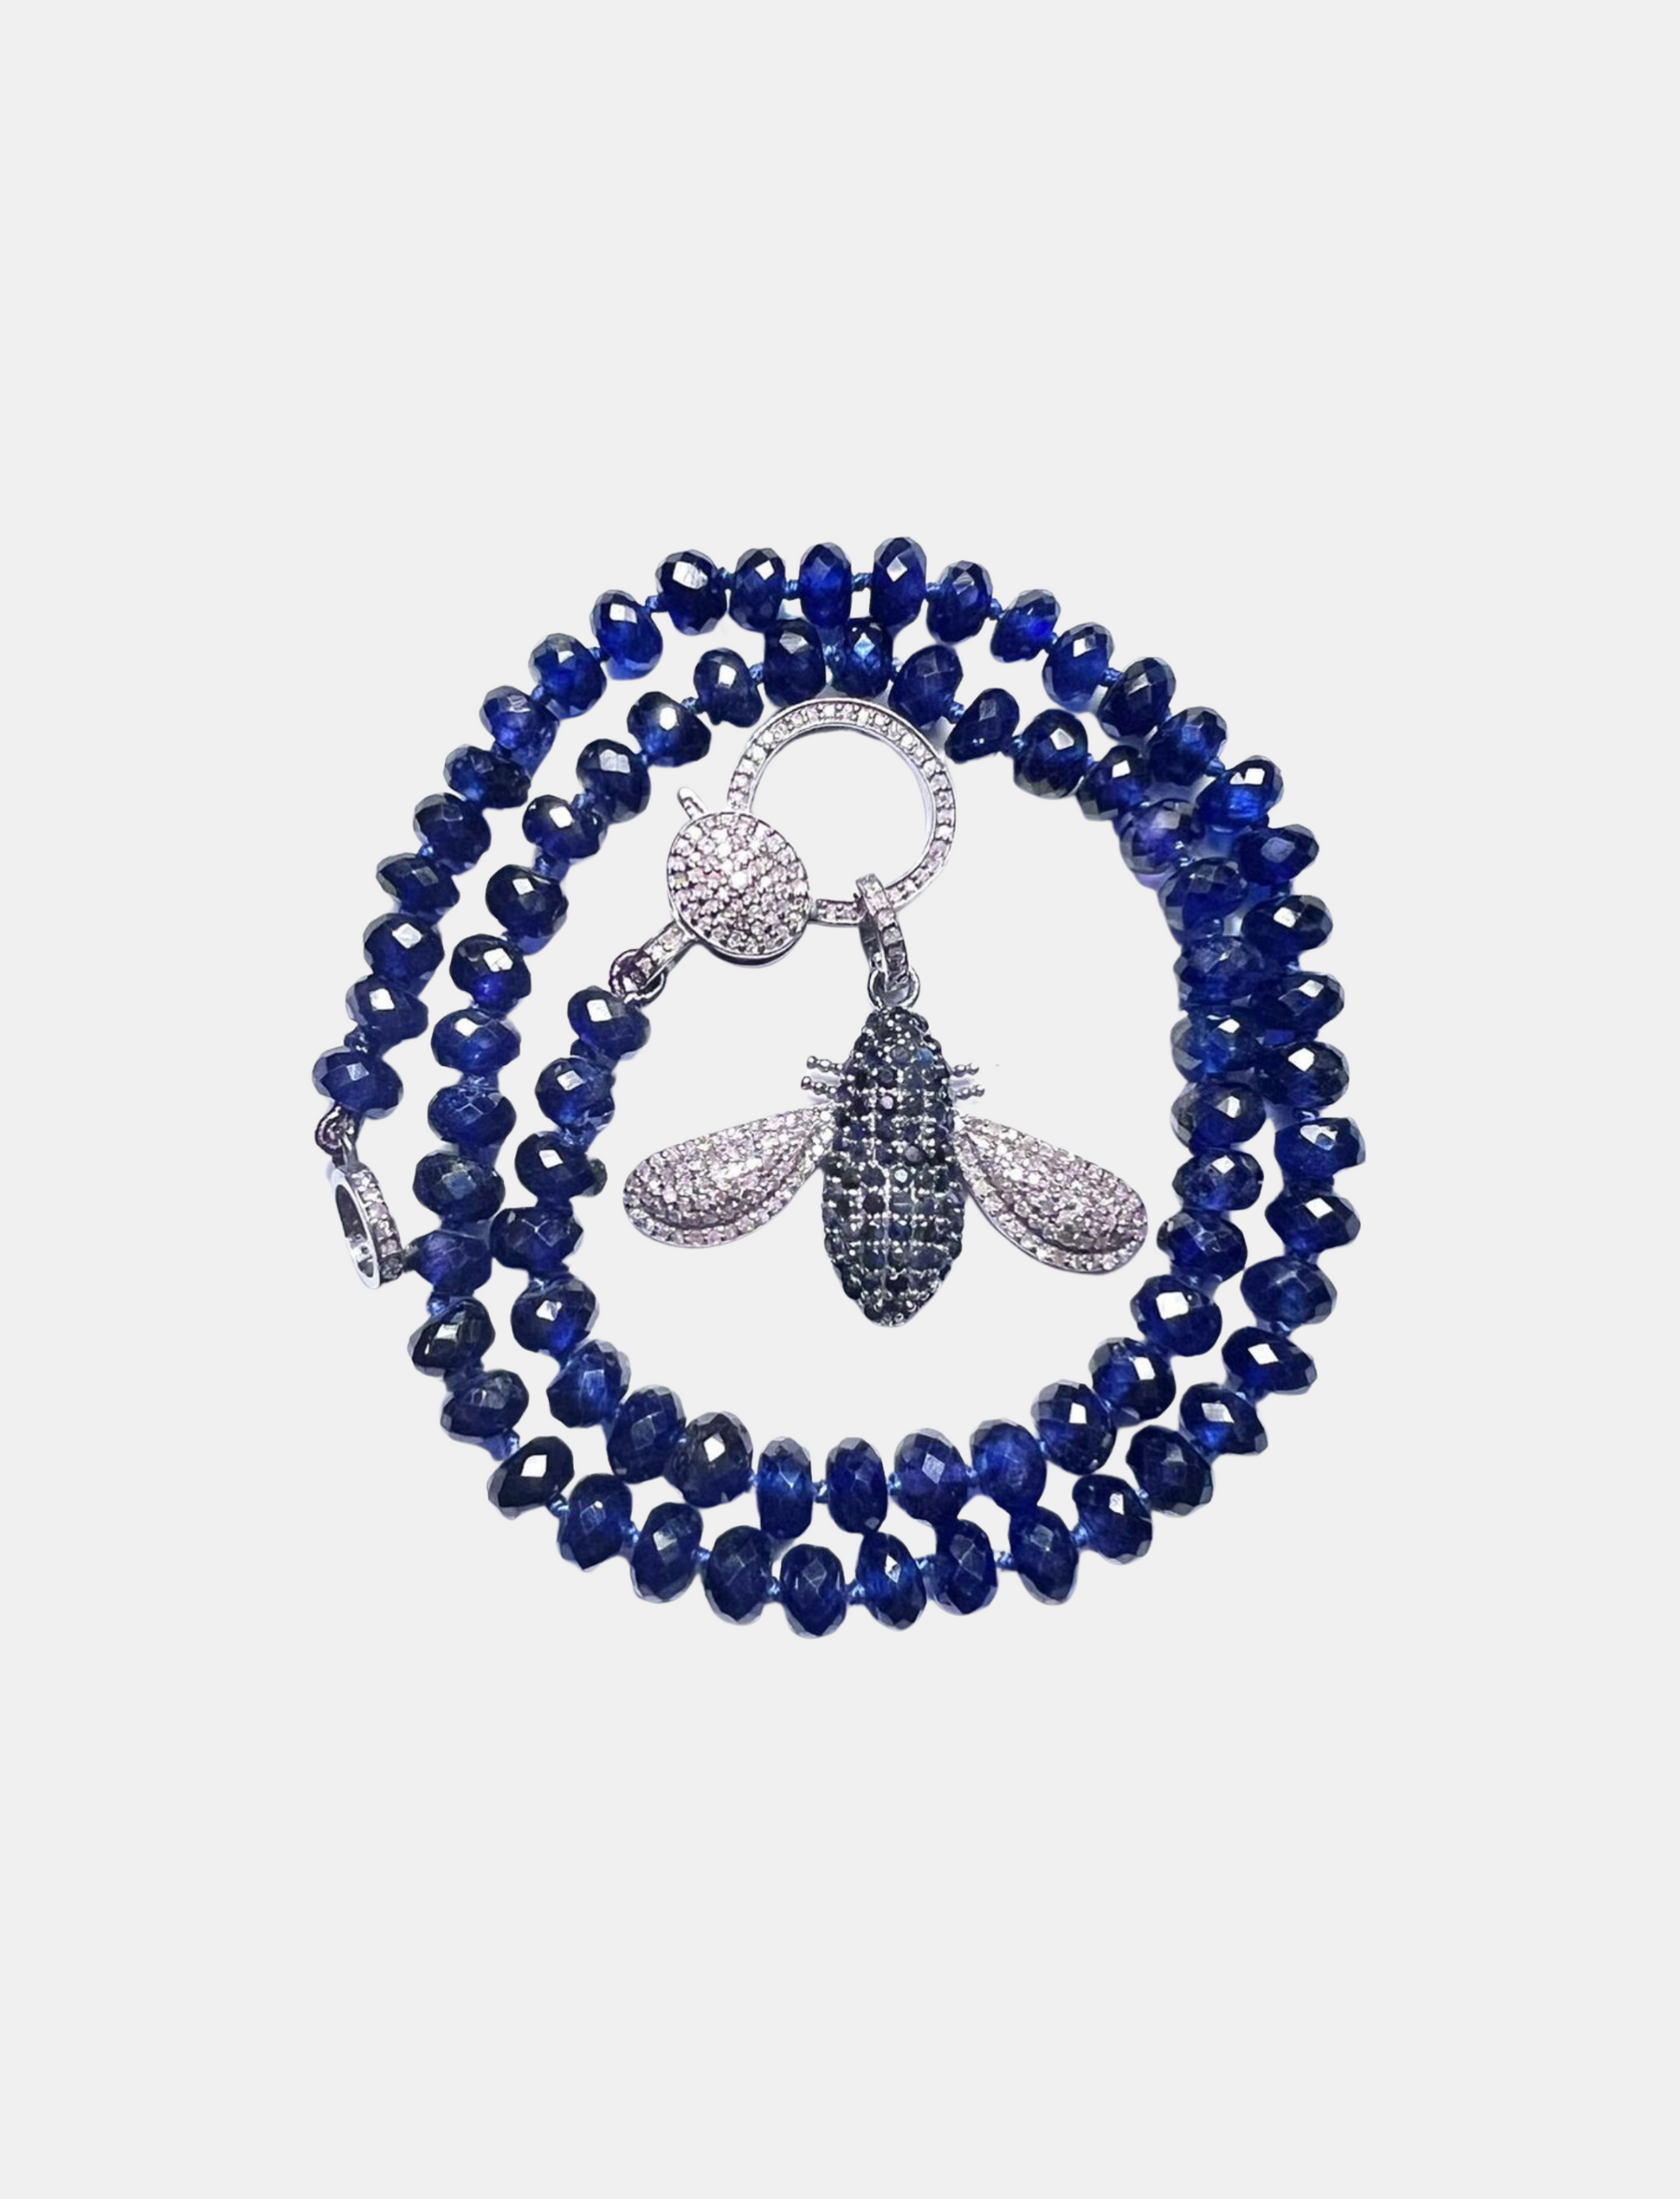 Blue Sapphire Knotted Necklace, Large Pave Diamond Clasp, Pave Diamond Blue Sapphire Bee